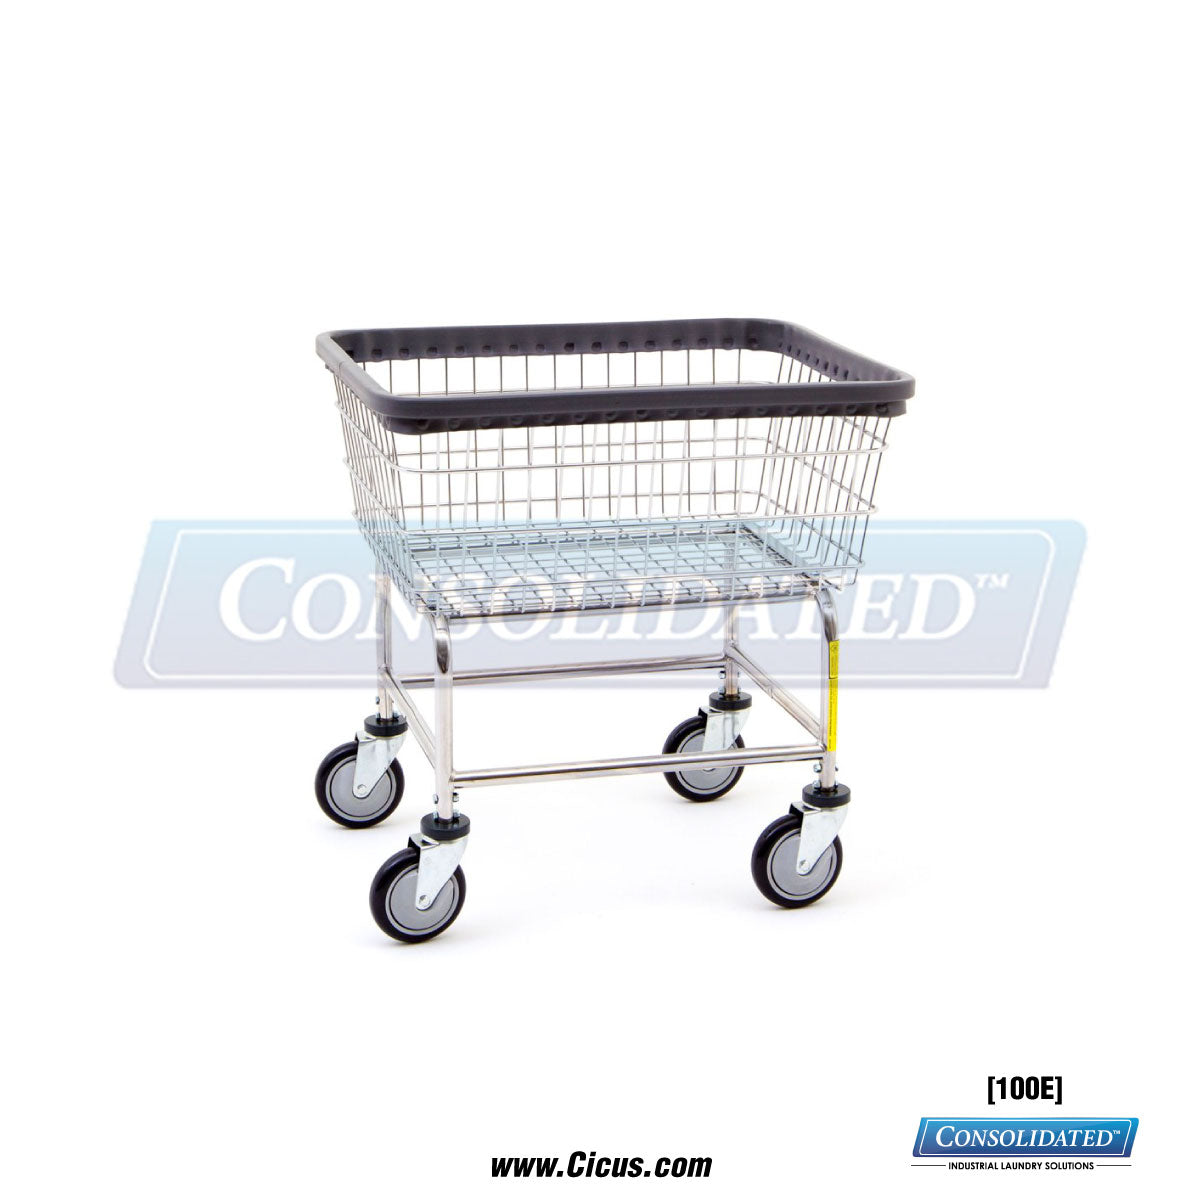 R & B Wire Standard Laundry Cart [100E] - Front View